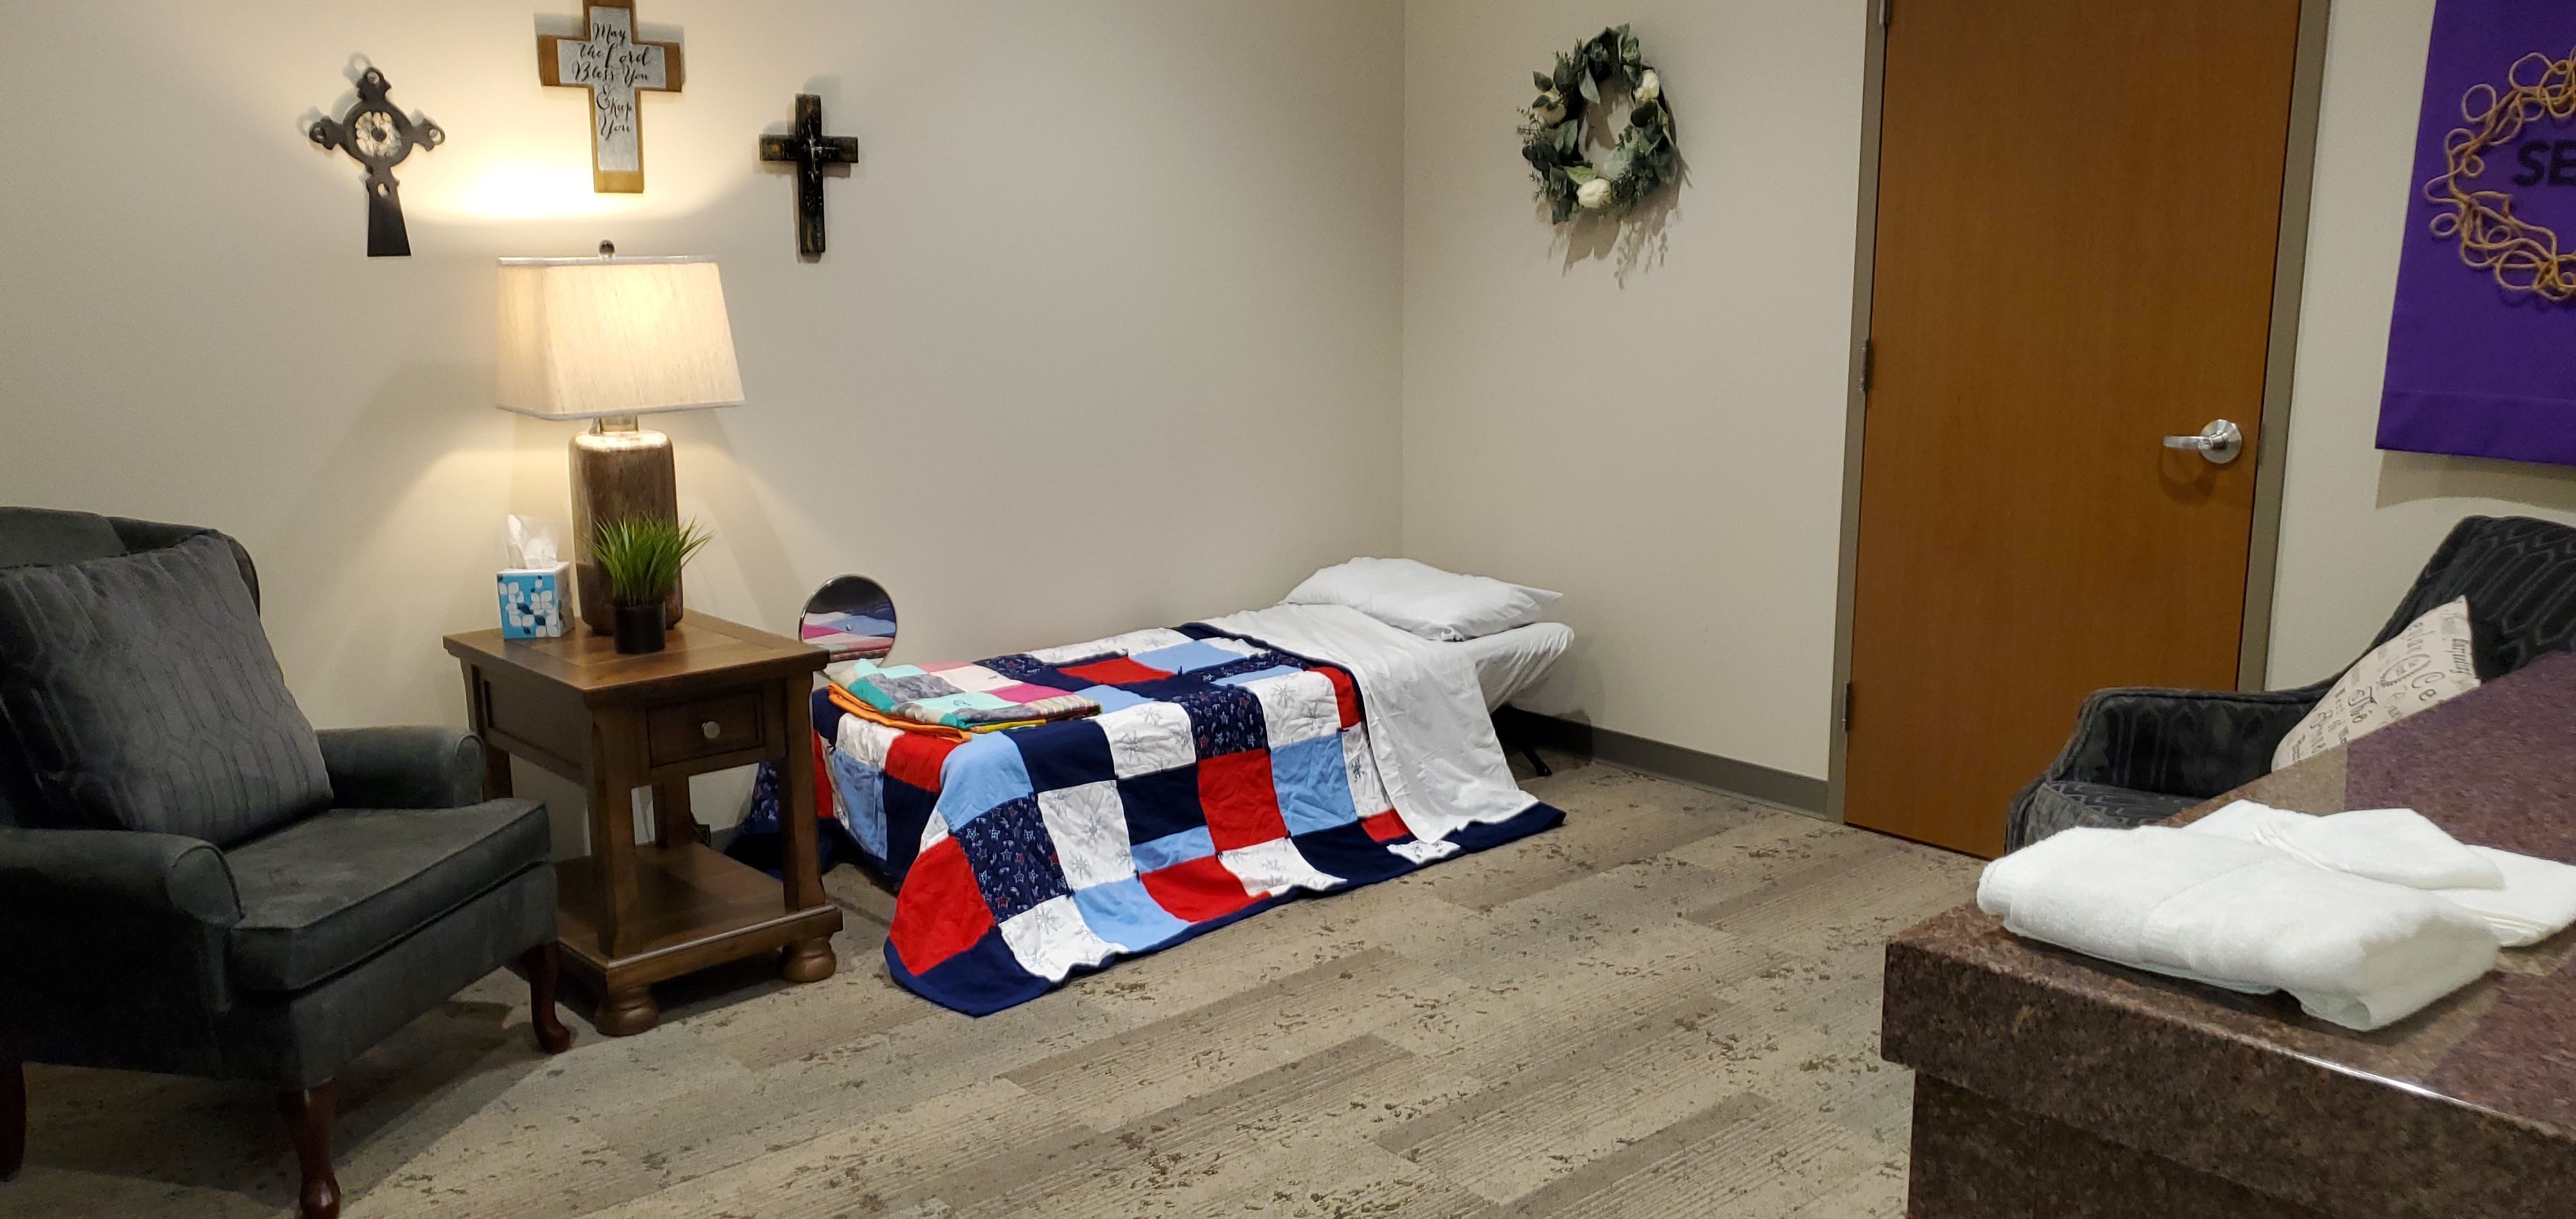 Pictured: Room set up for Hope Haven guest at First Lutheran Church. 